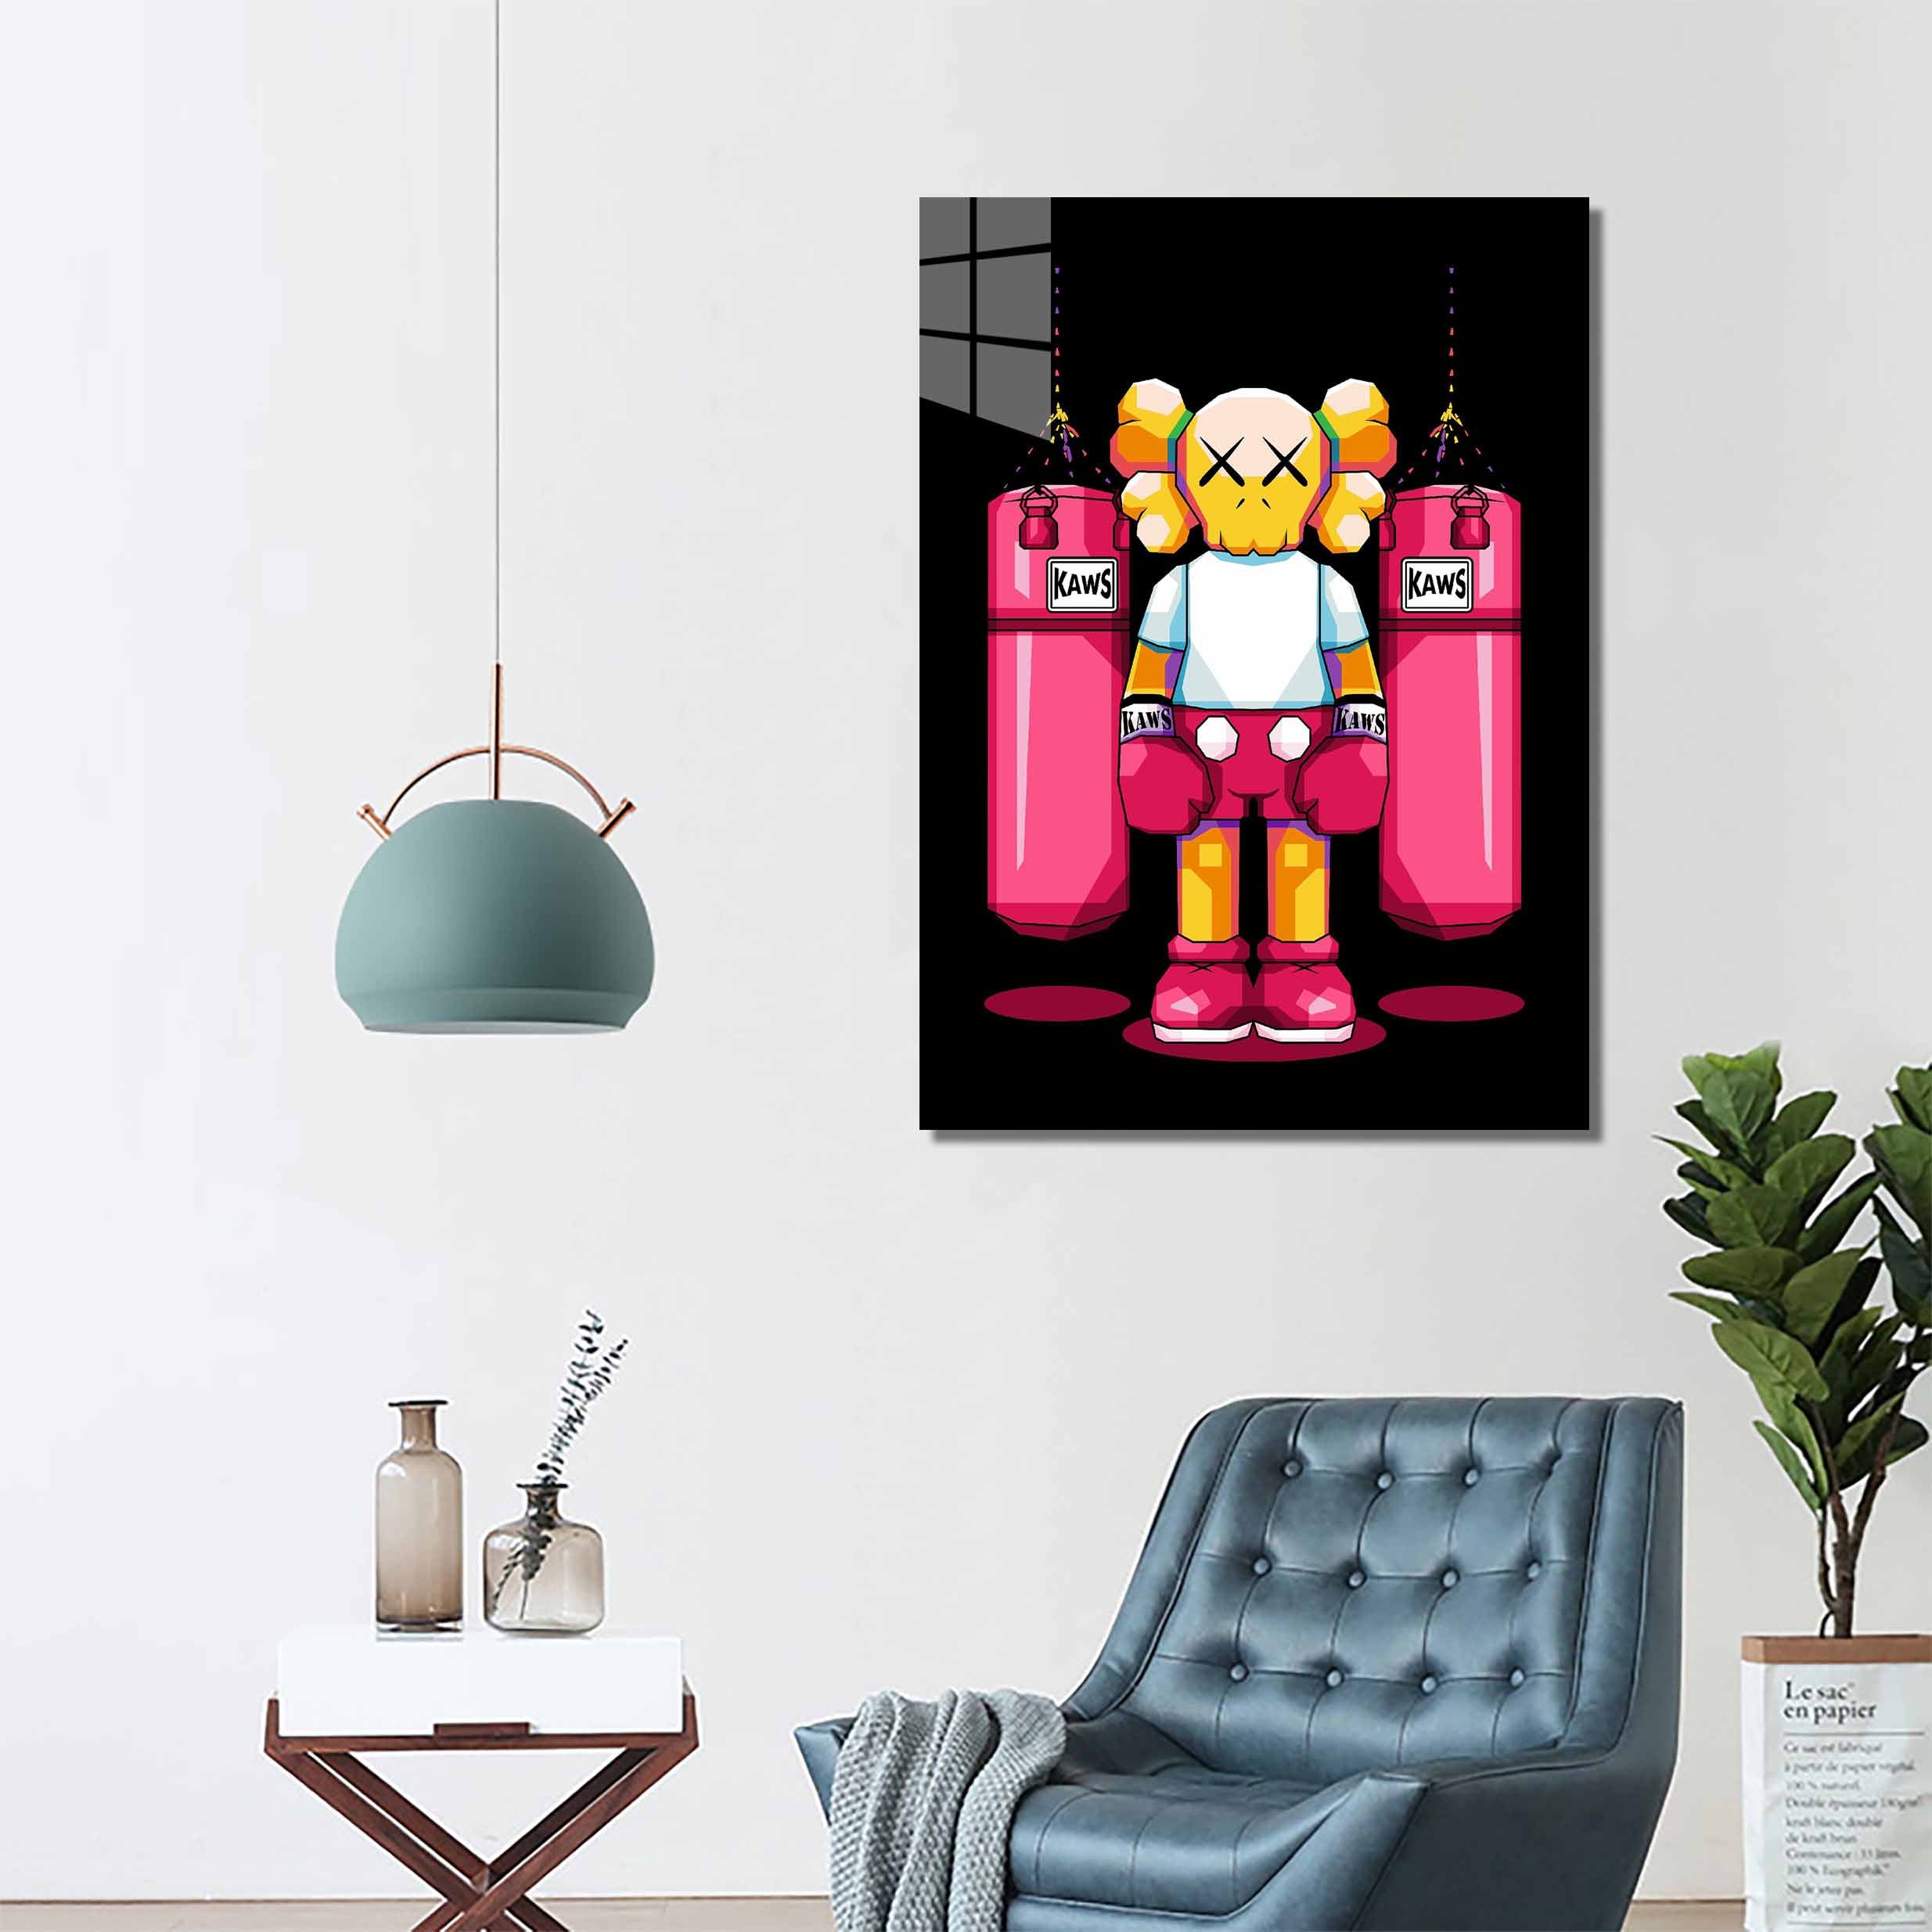 Kaws Boxing-designed by @Doublede Design